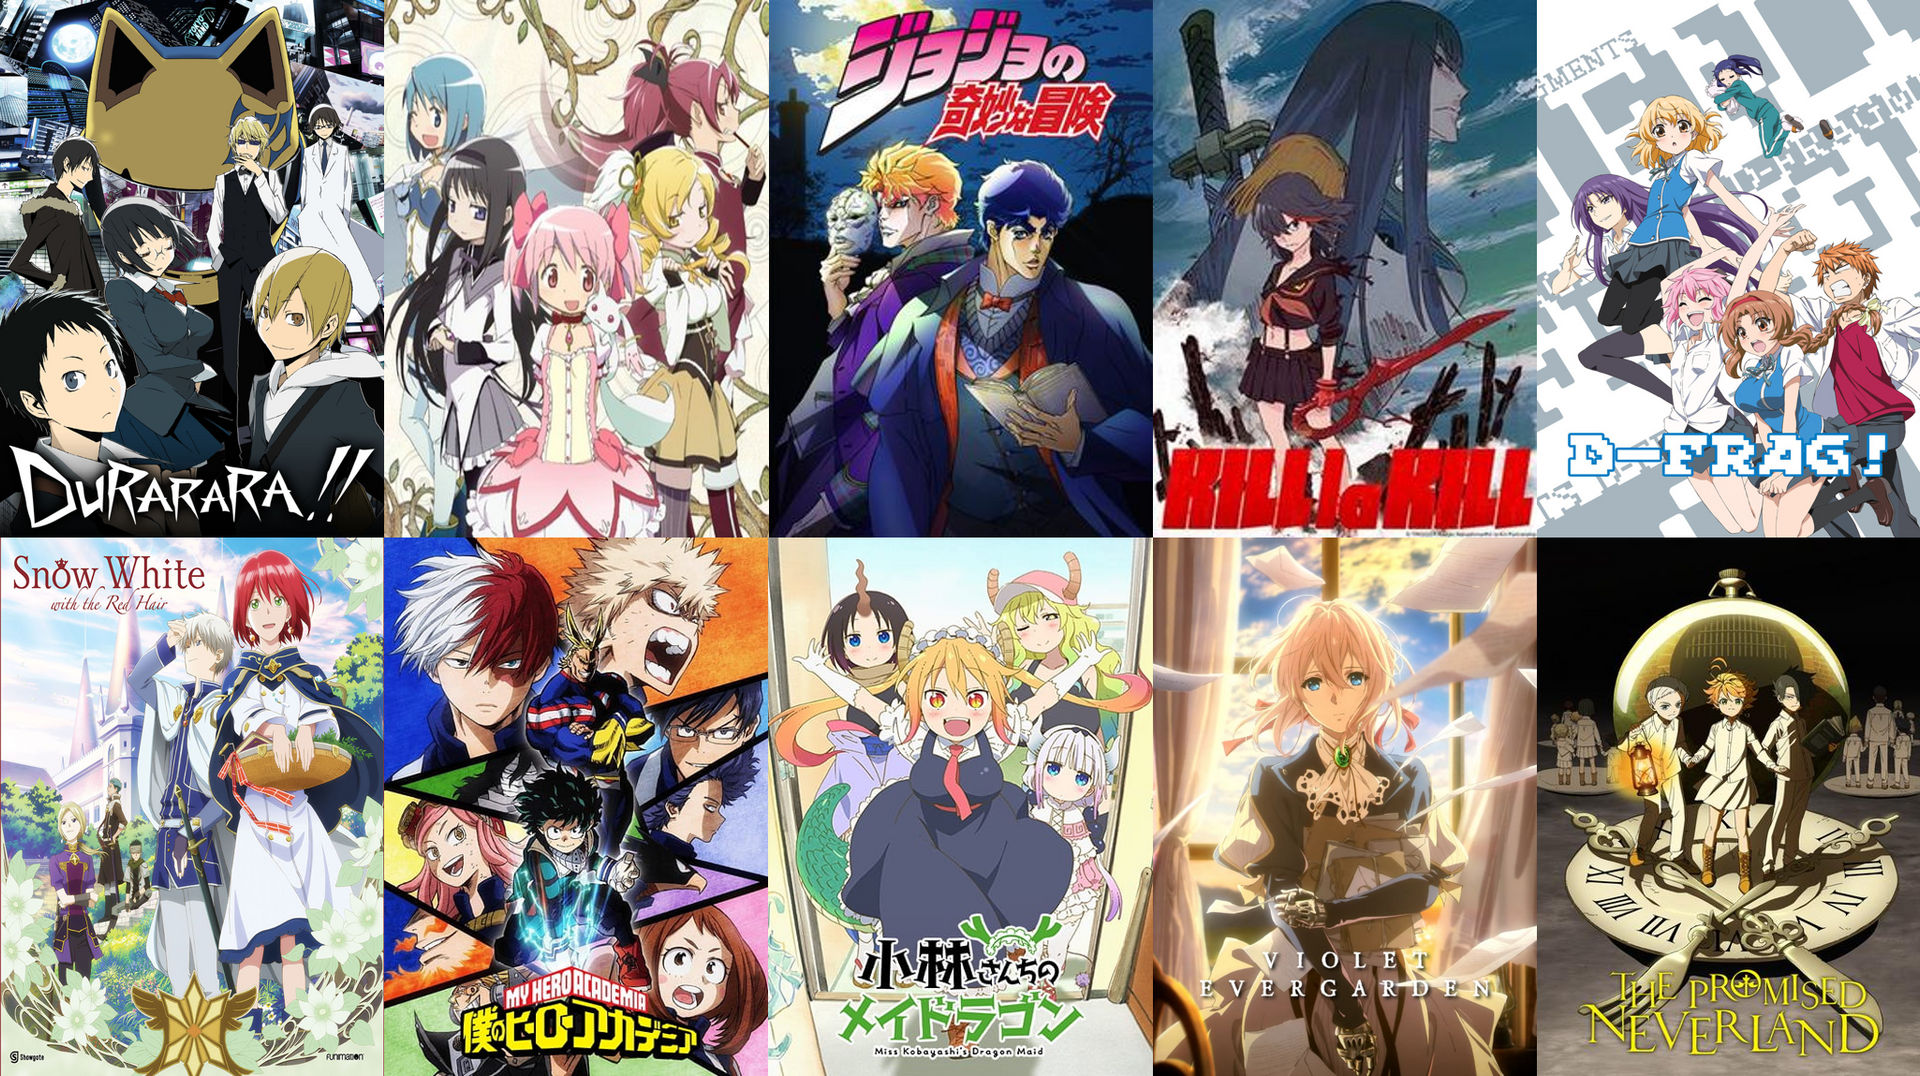 My favorite anime of each year (stars represent favorites) : r